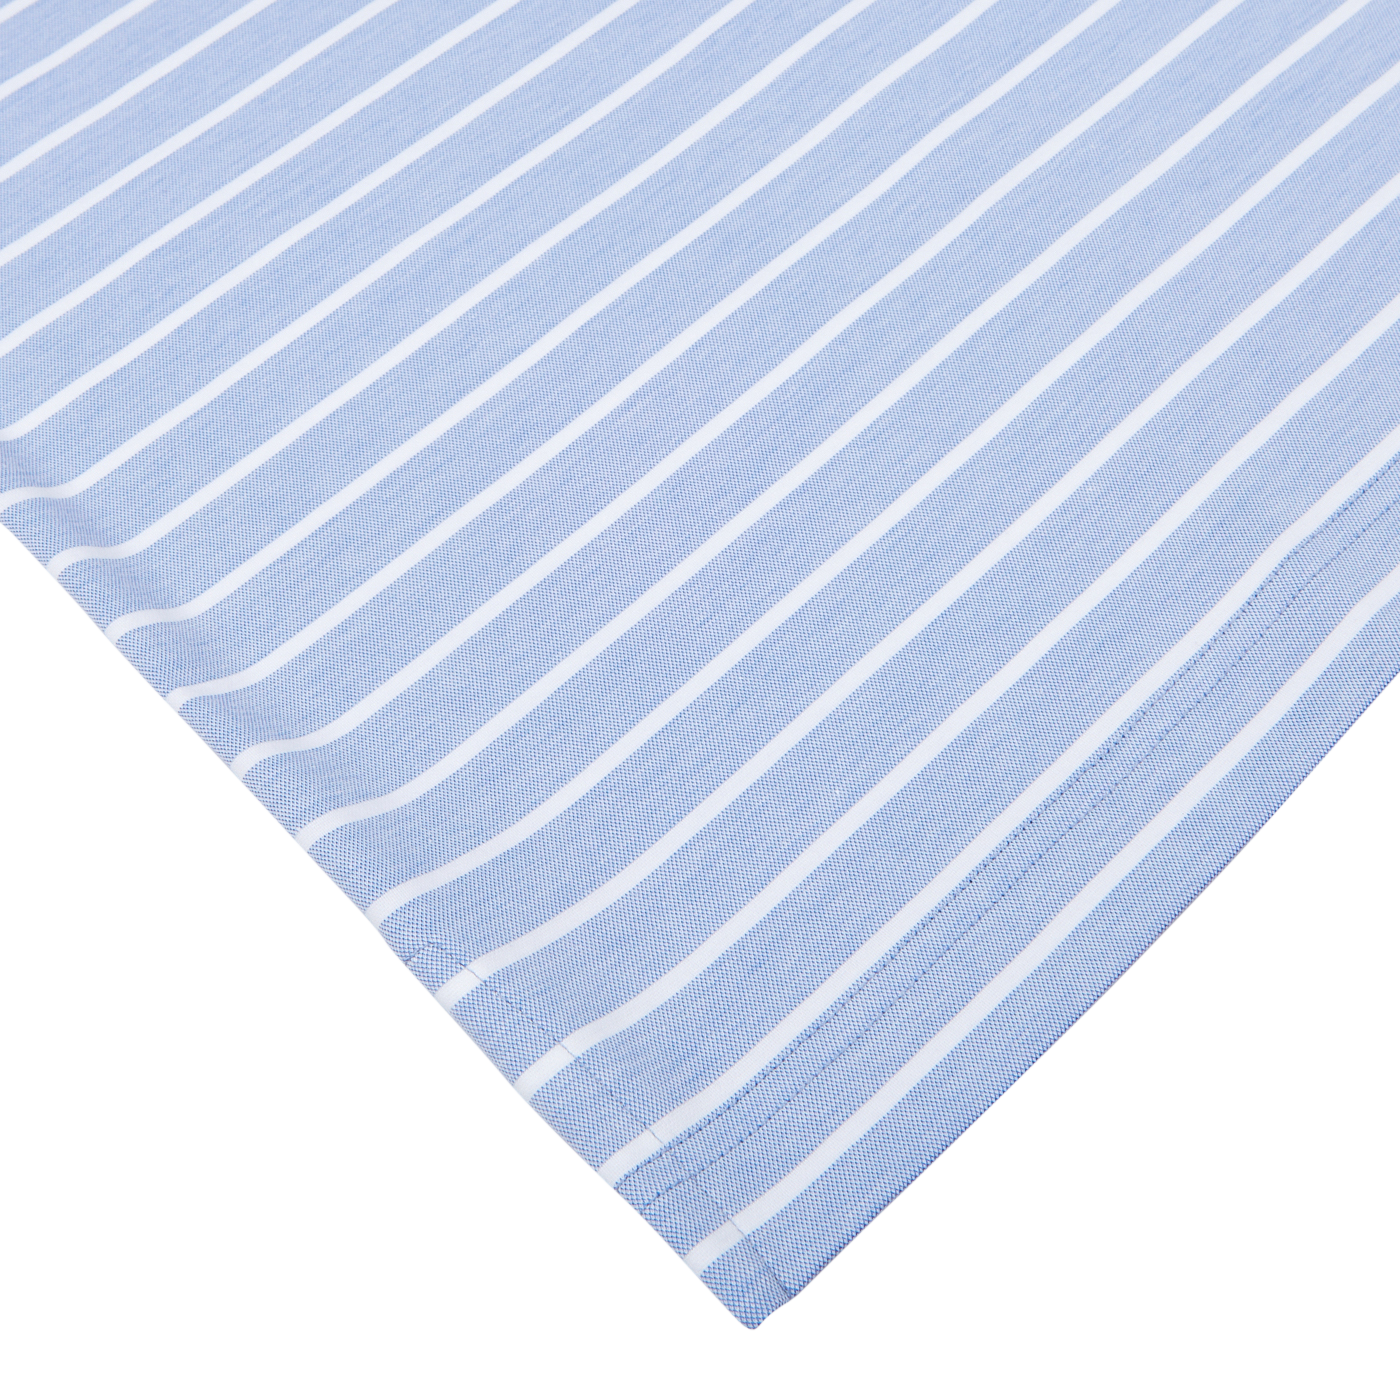 Striped blue and white Fedeli Blue Wide Striped Cotton Jersey Polo Shirt on a plain background, made in Italy.